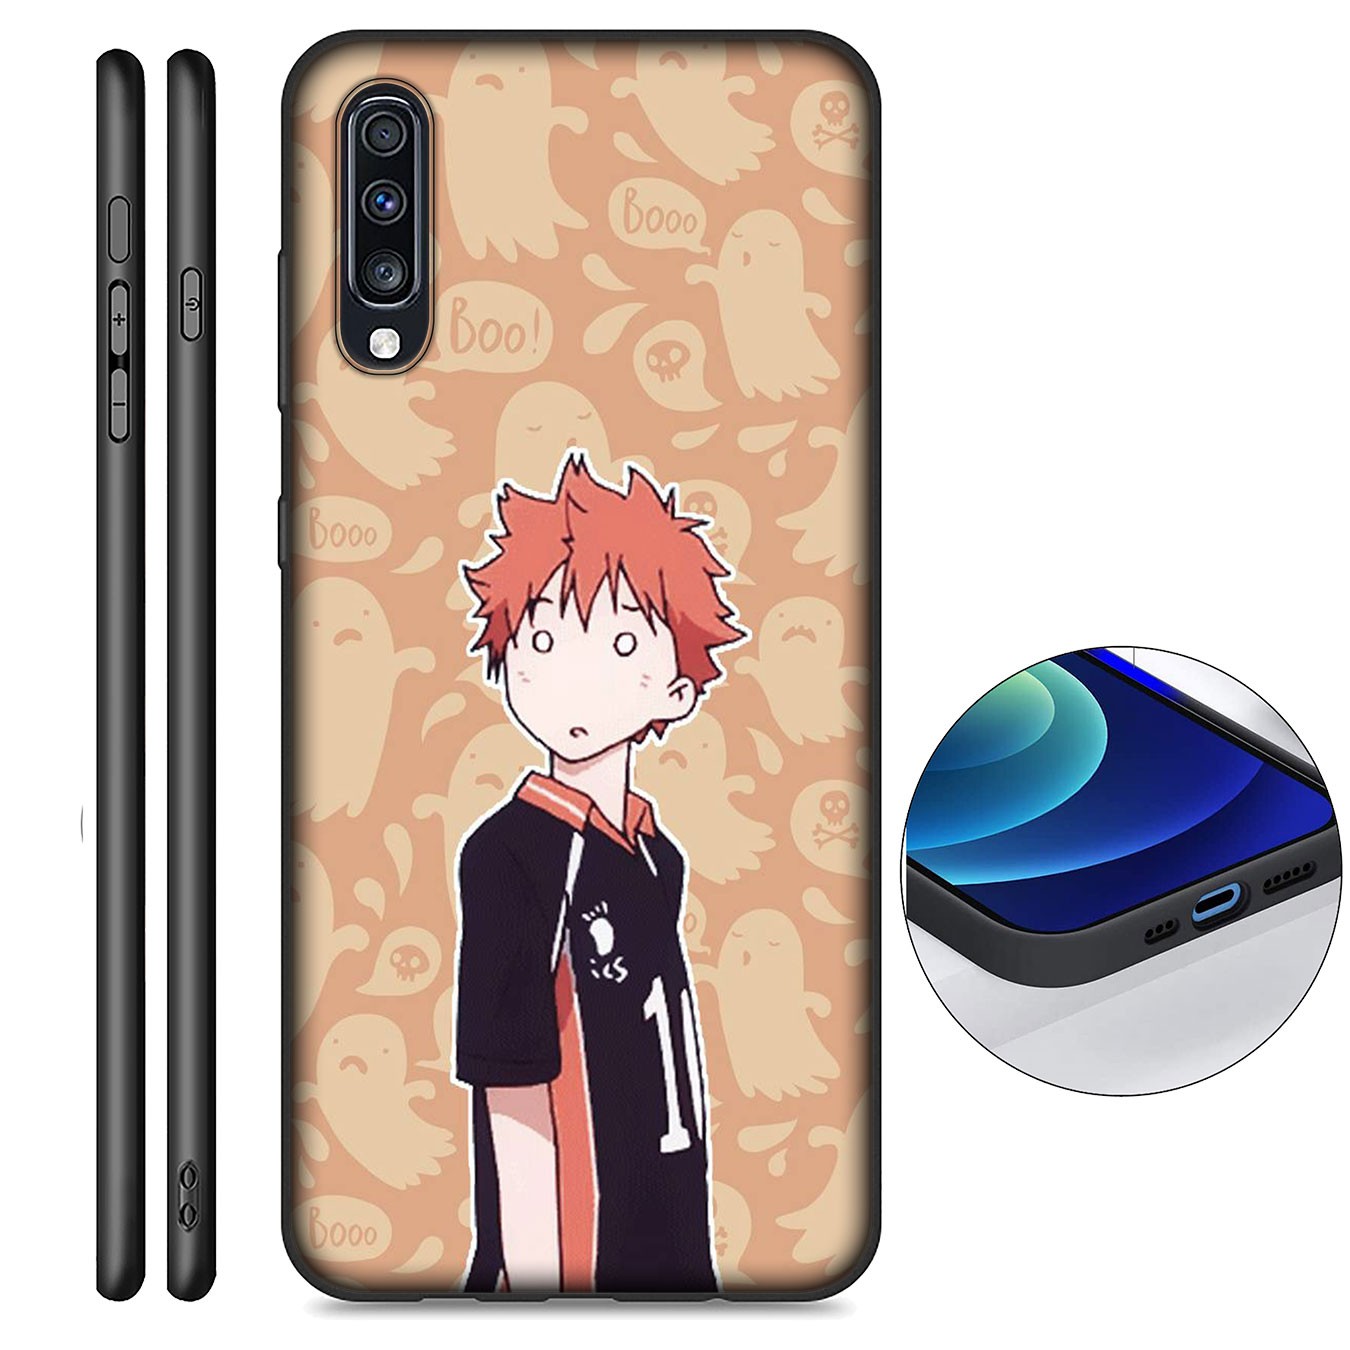 Samsung Galaxy S9 S10 S20 FE Ultra Plus Lite S20+ S9+ S10+ S20Plus Casing Soft Silicone Phone Case H48 Haikyuu Attacks volleyball Anime Cover